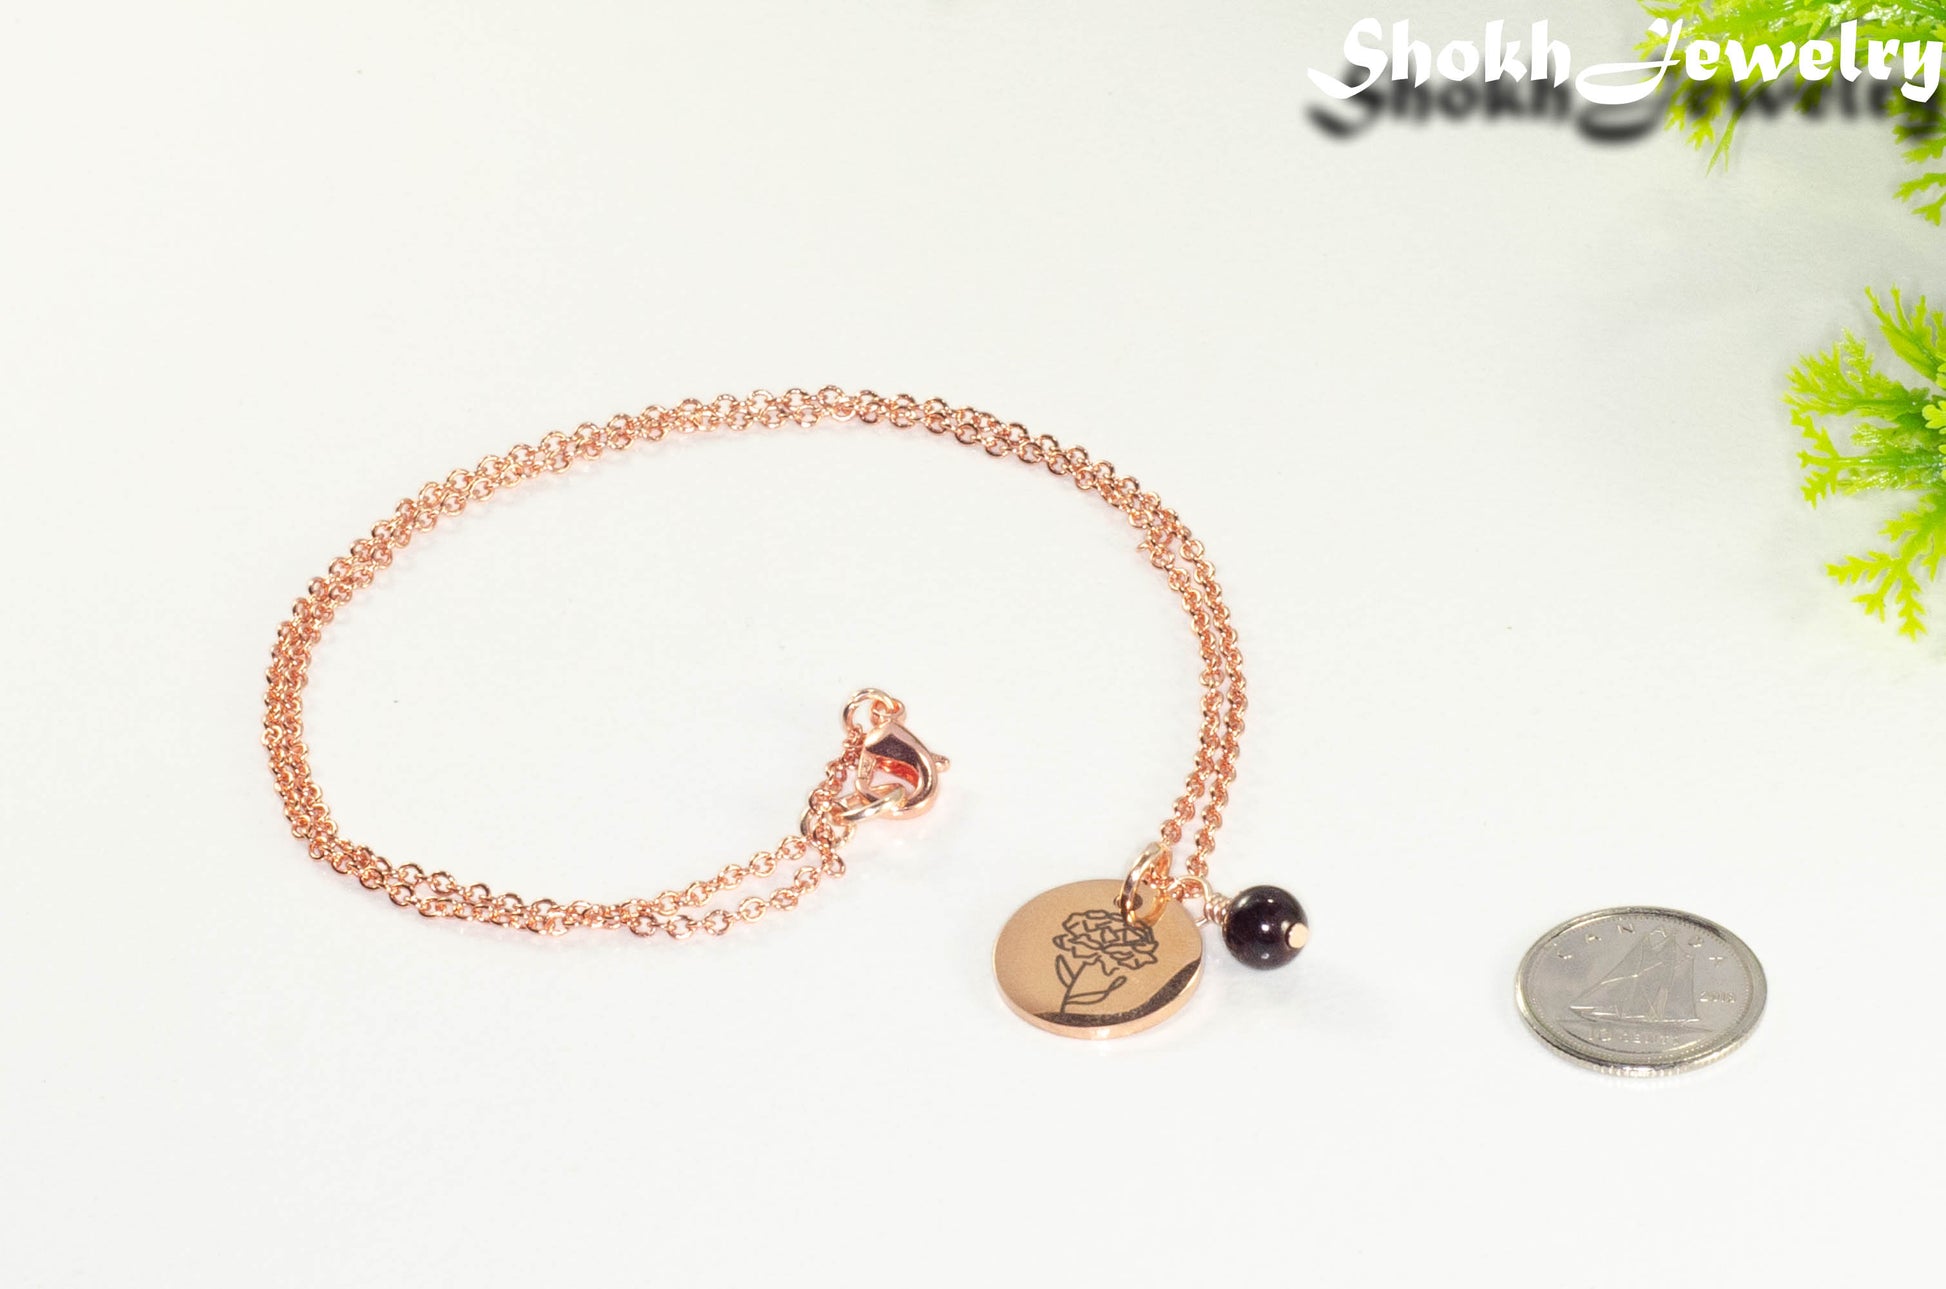 Rose Gold Plated January Birth Flower Necklace with Garnet Birthstone Pendant beside a dime.